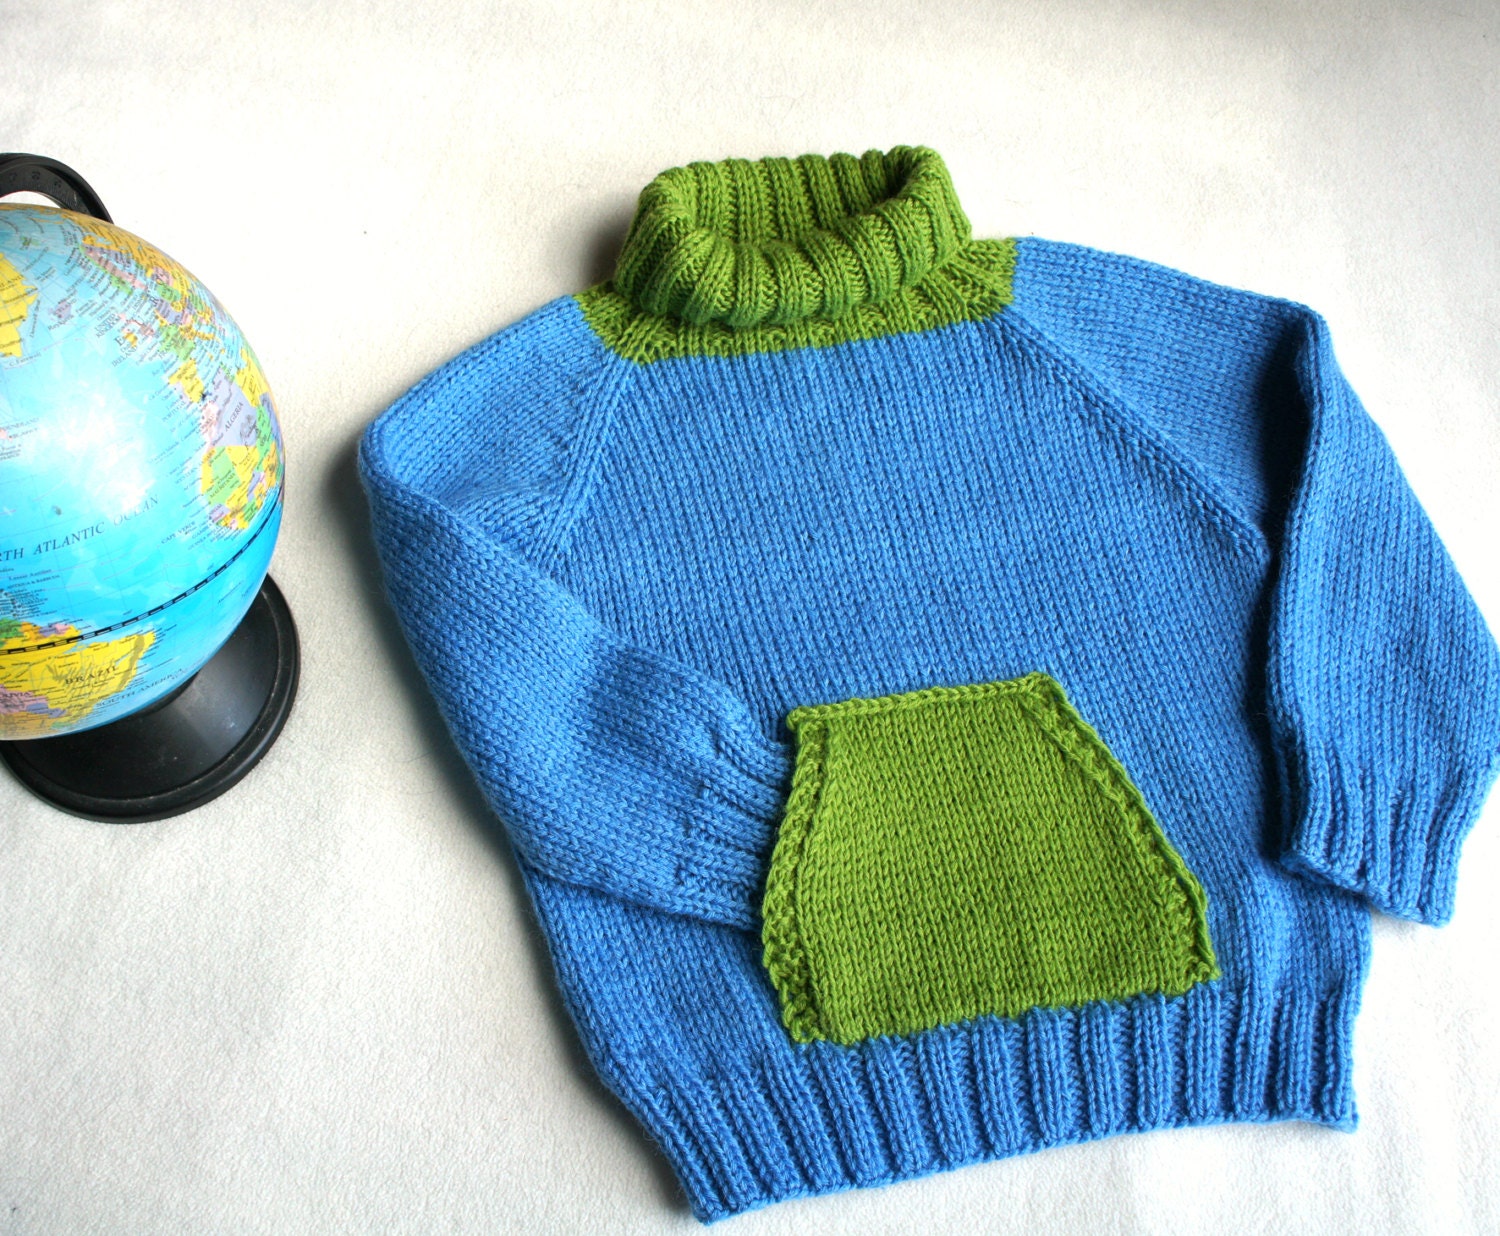 Blue and green sweater for children turtle neck with pocket